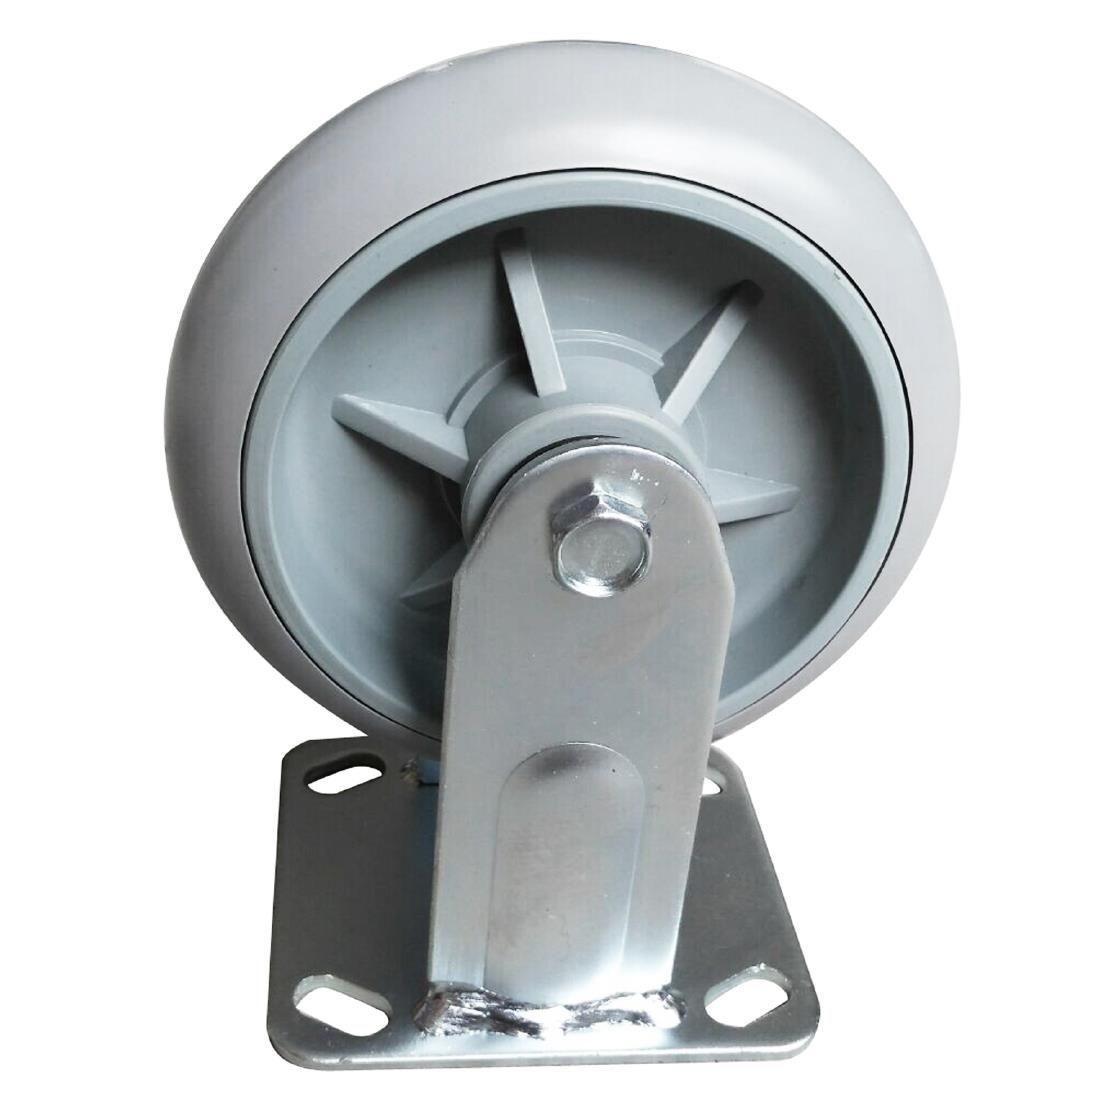 AD752 Jantex Spare Castors for Housekeeping Trolley JD Catering Equipment Solutions Ltd